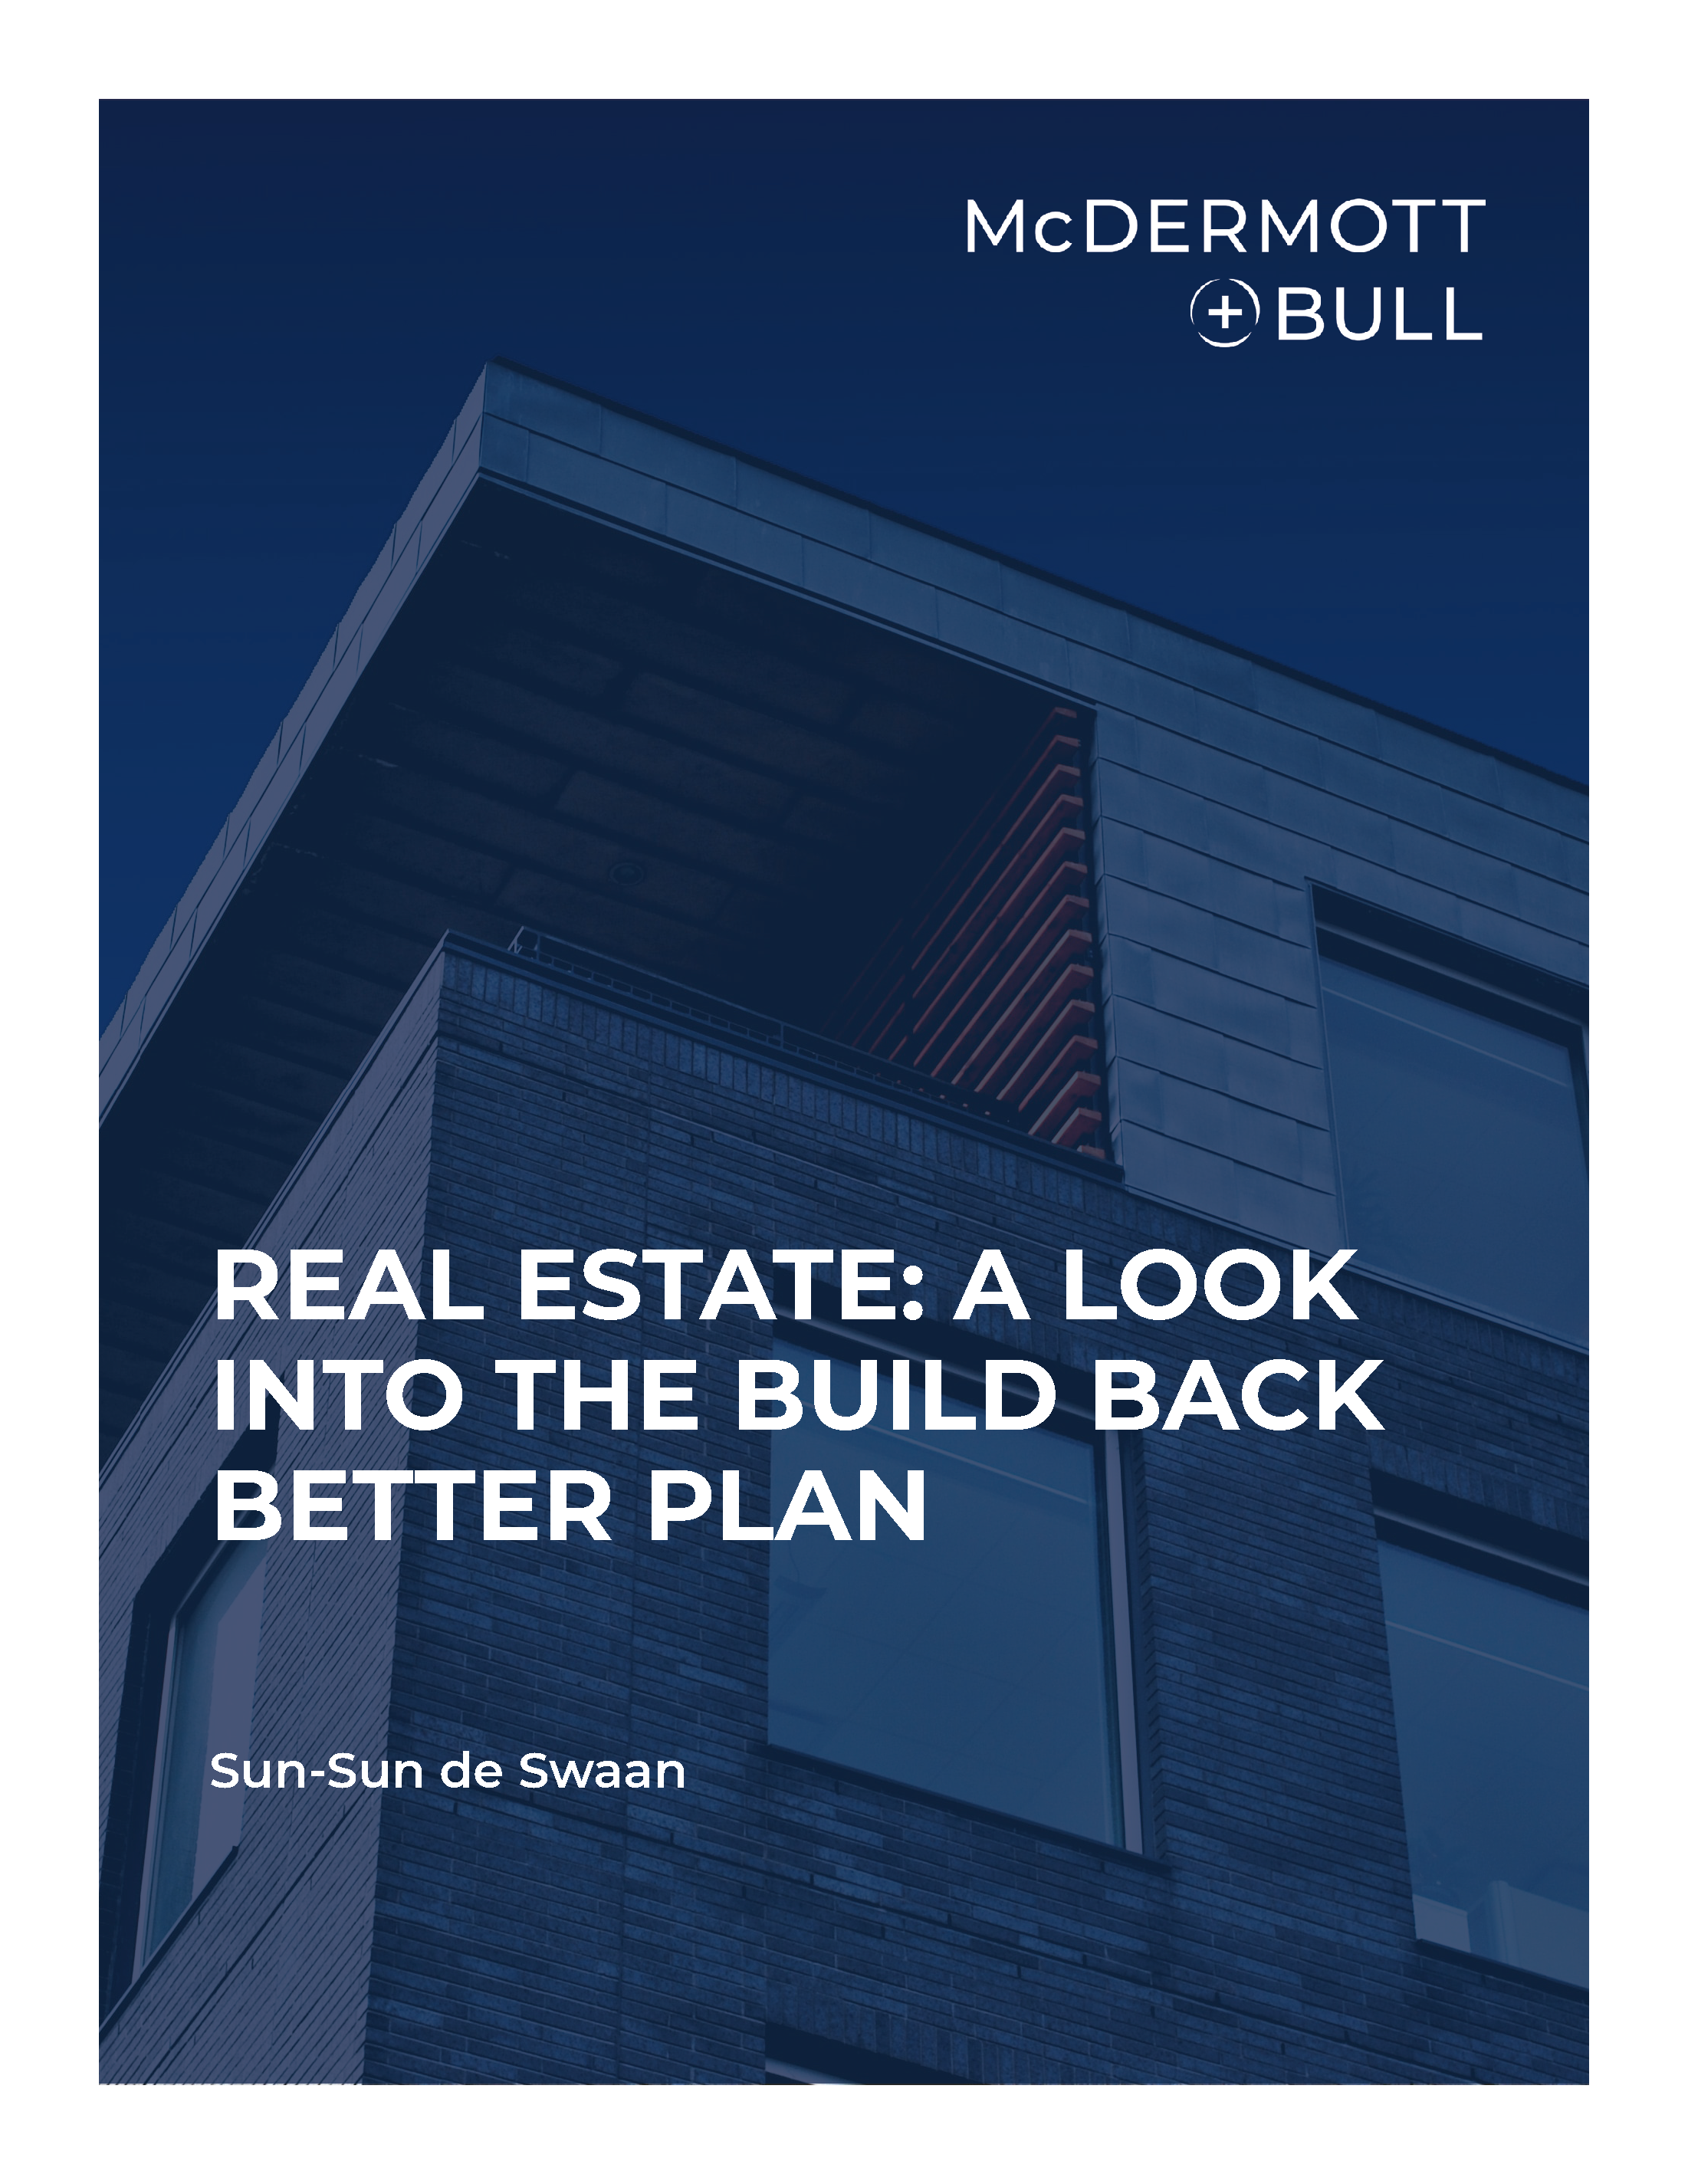 White Paper: Real Estate — A Look Into the Build Back Better Plan